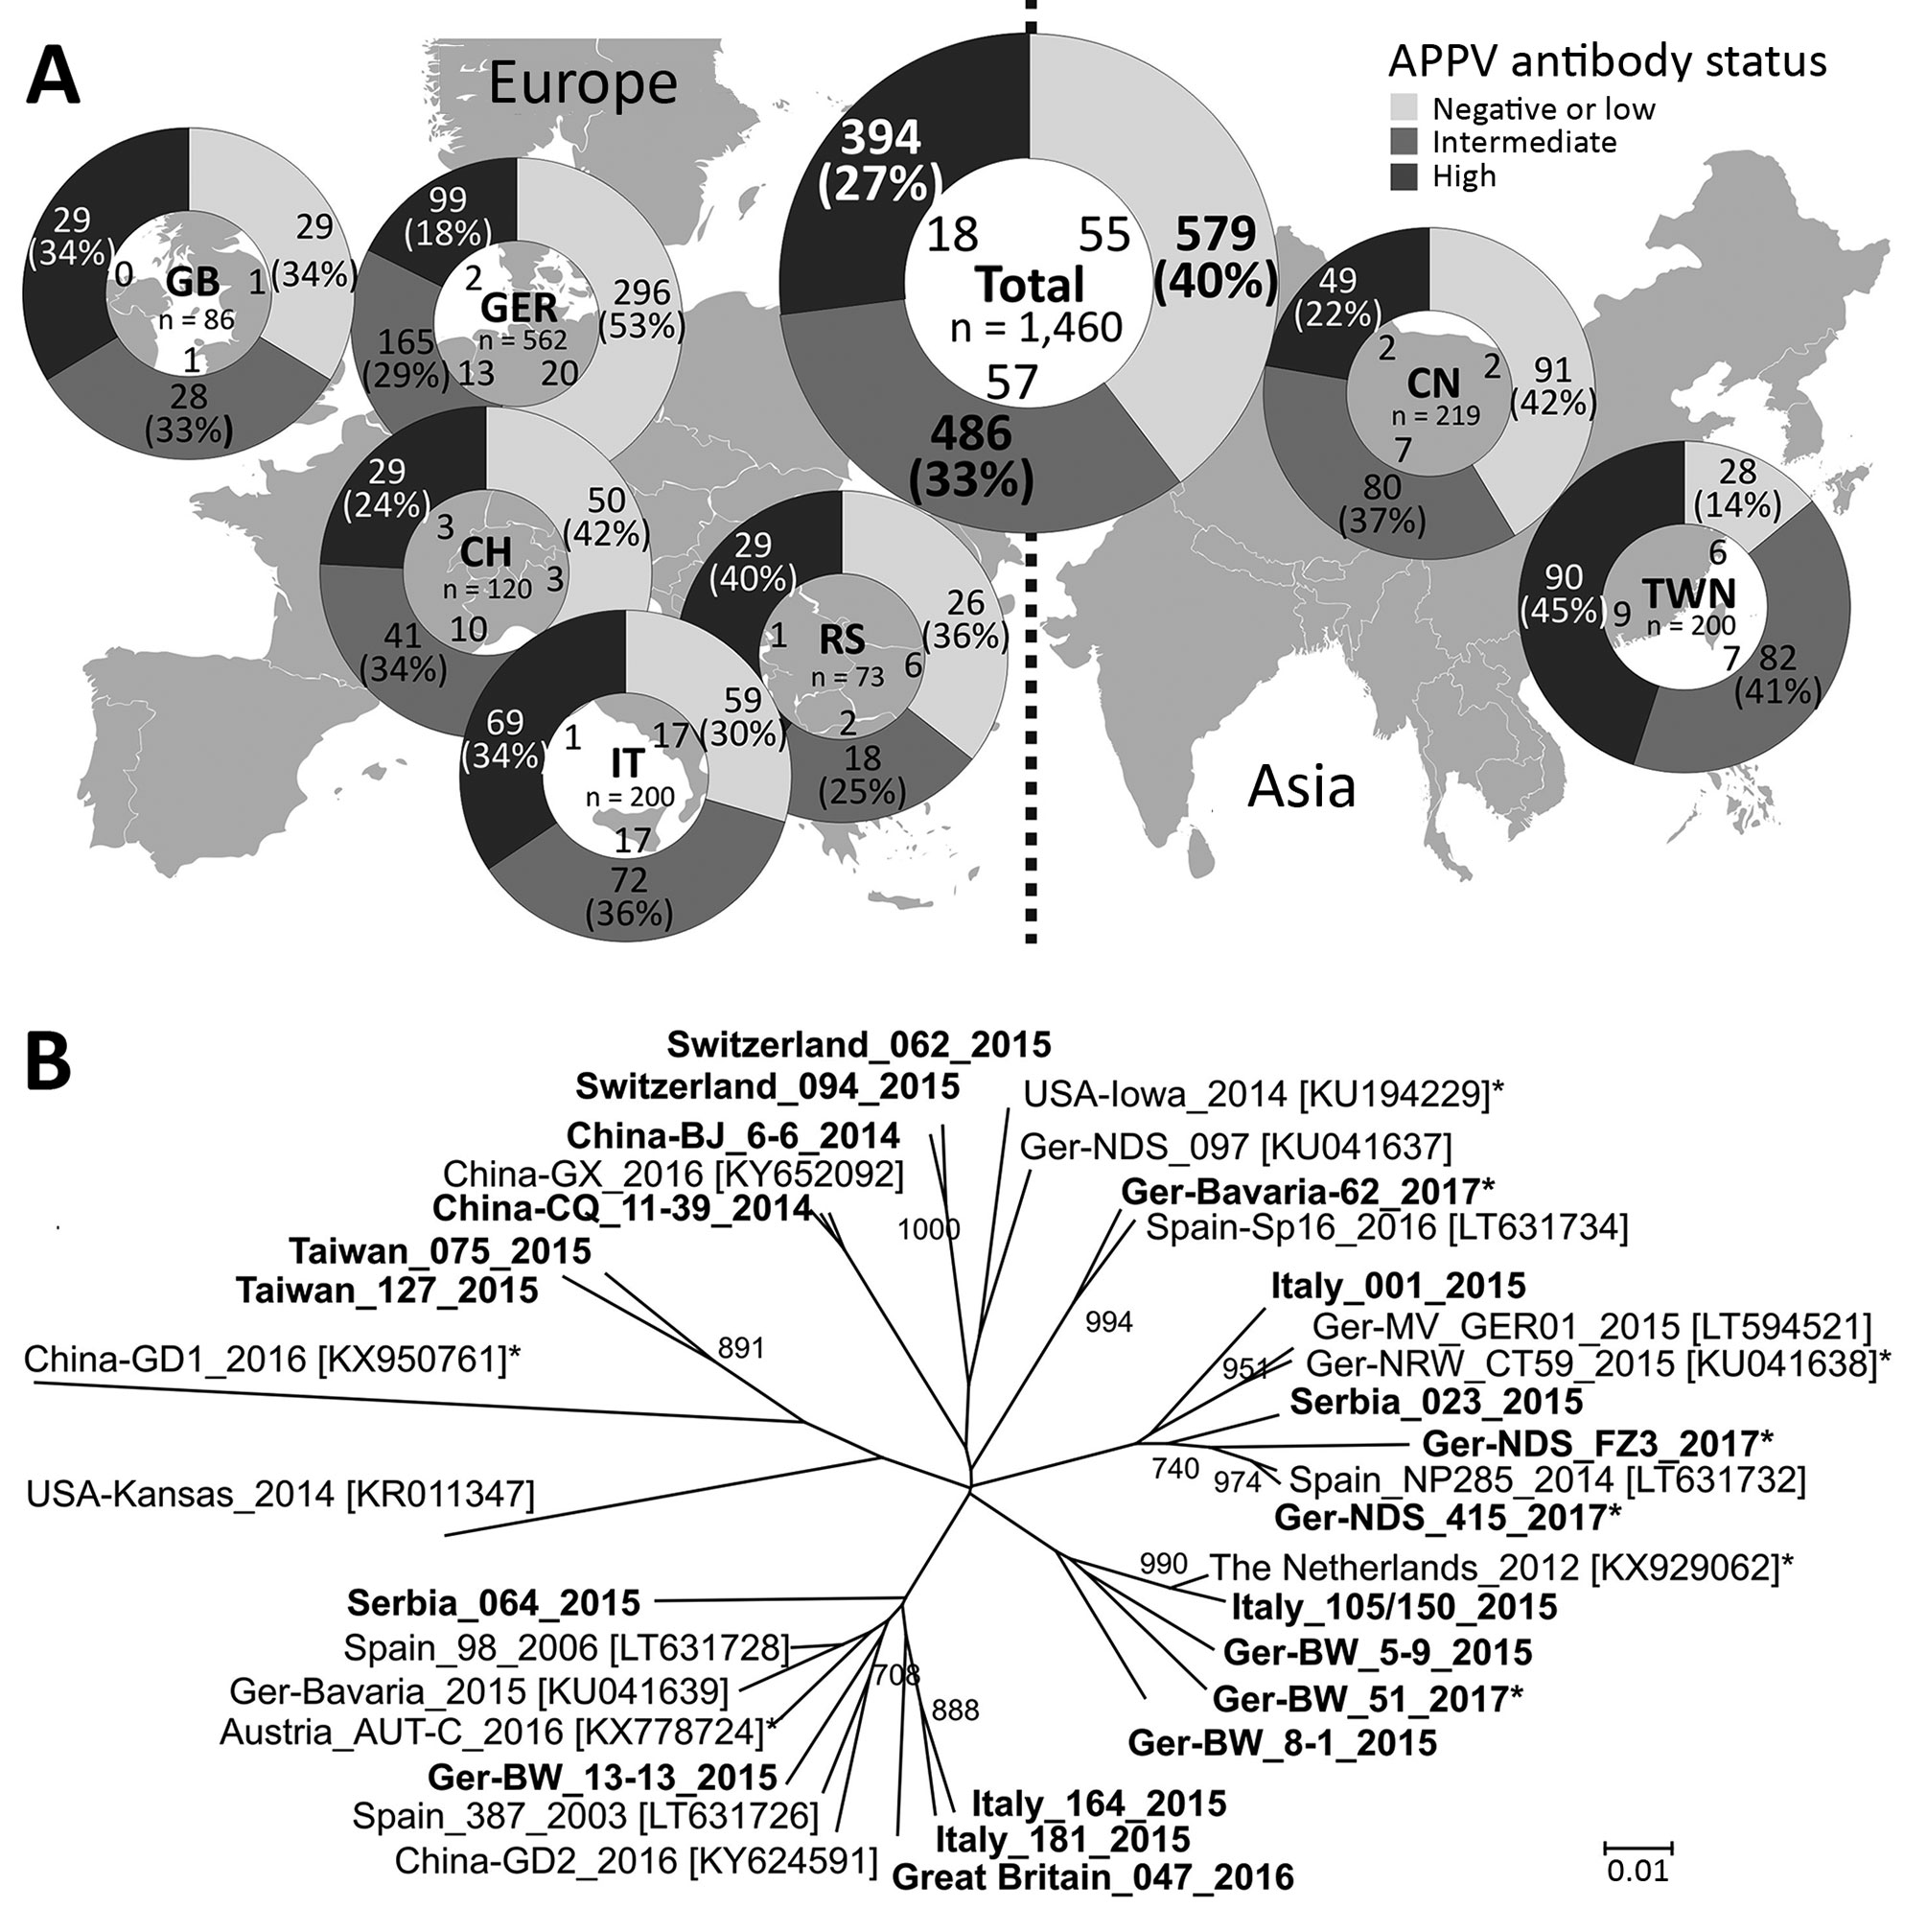 Detection rates of APPV genome and antibodies and genetic variability in Europe and Asia. A) APPV antibody status in pigs from parts of Europe and Asia. The region of origin, the number of investigated samples, and the absolute numbers of APPV genome–positive samples in dependence on the serologic category (low, intermediate, or high APPV antibody status) are shown in the central circle. B) Phylogenetic tree based on a 400-nt fragment in the nonstructural protein 3 encoding region. We calculated